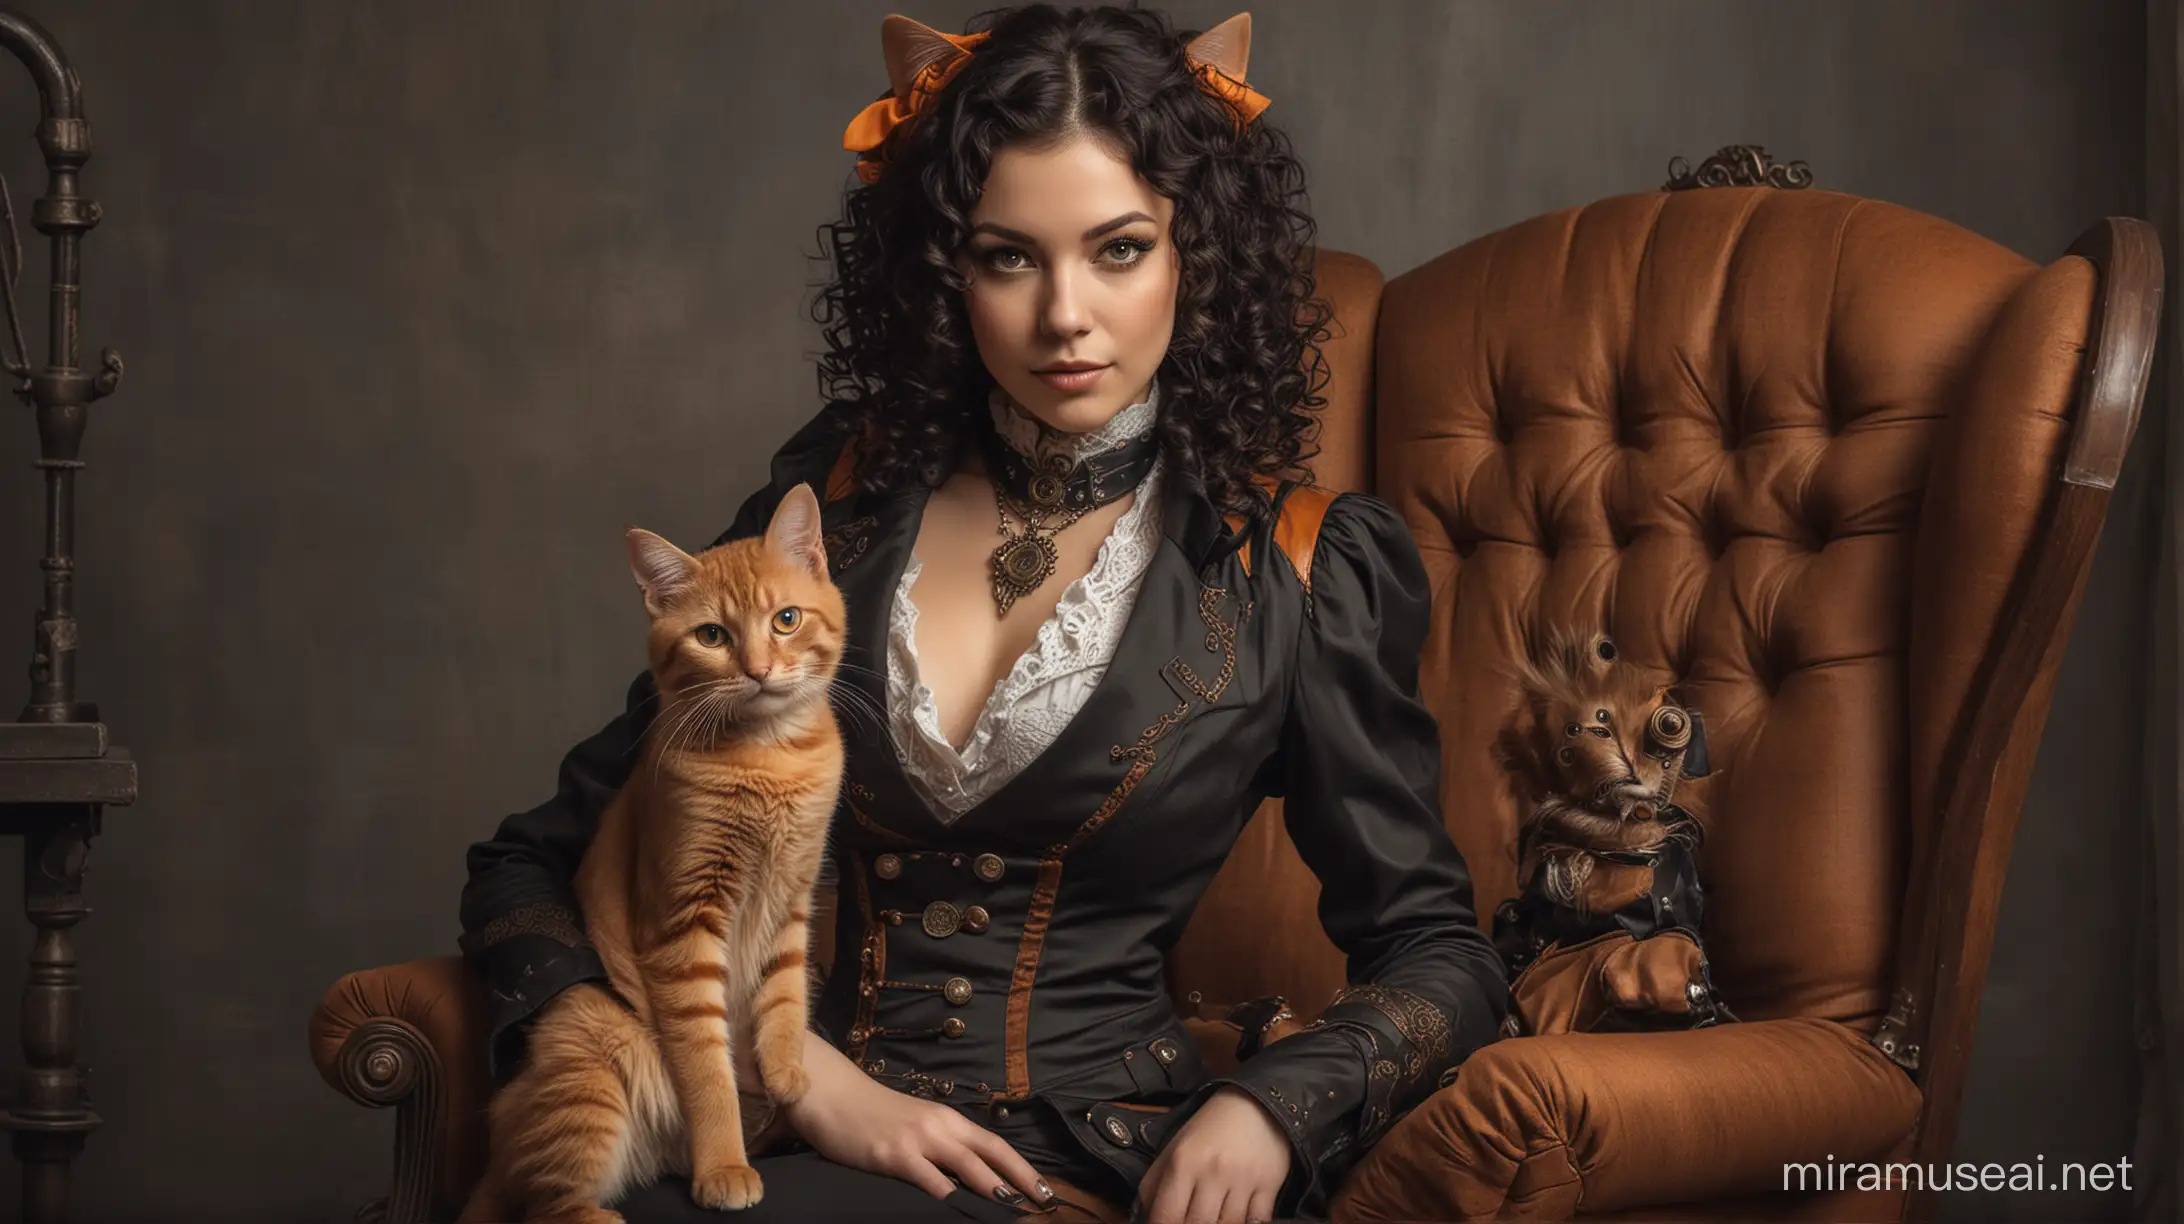 Steampunk Woman Relaxing with Orange Cat in Armchair